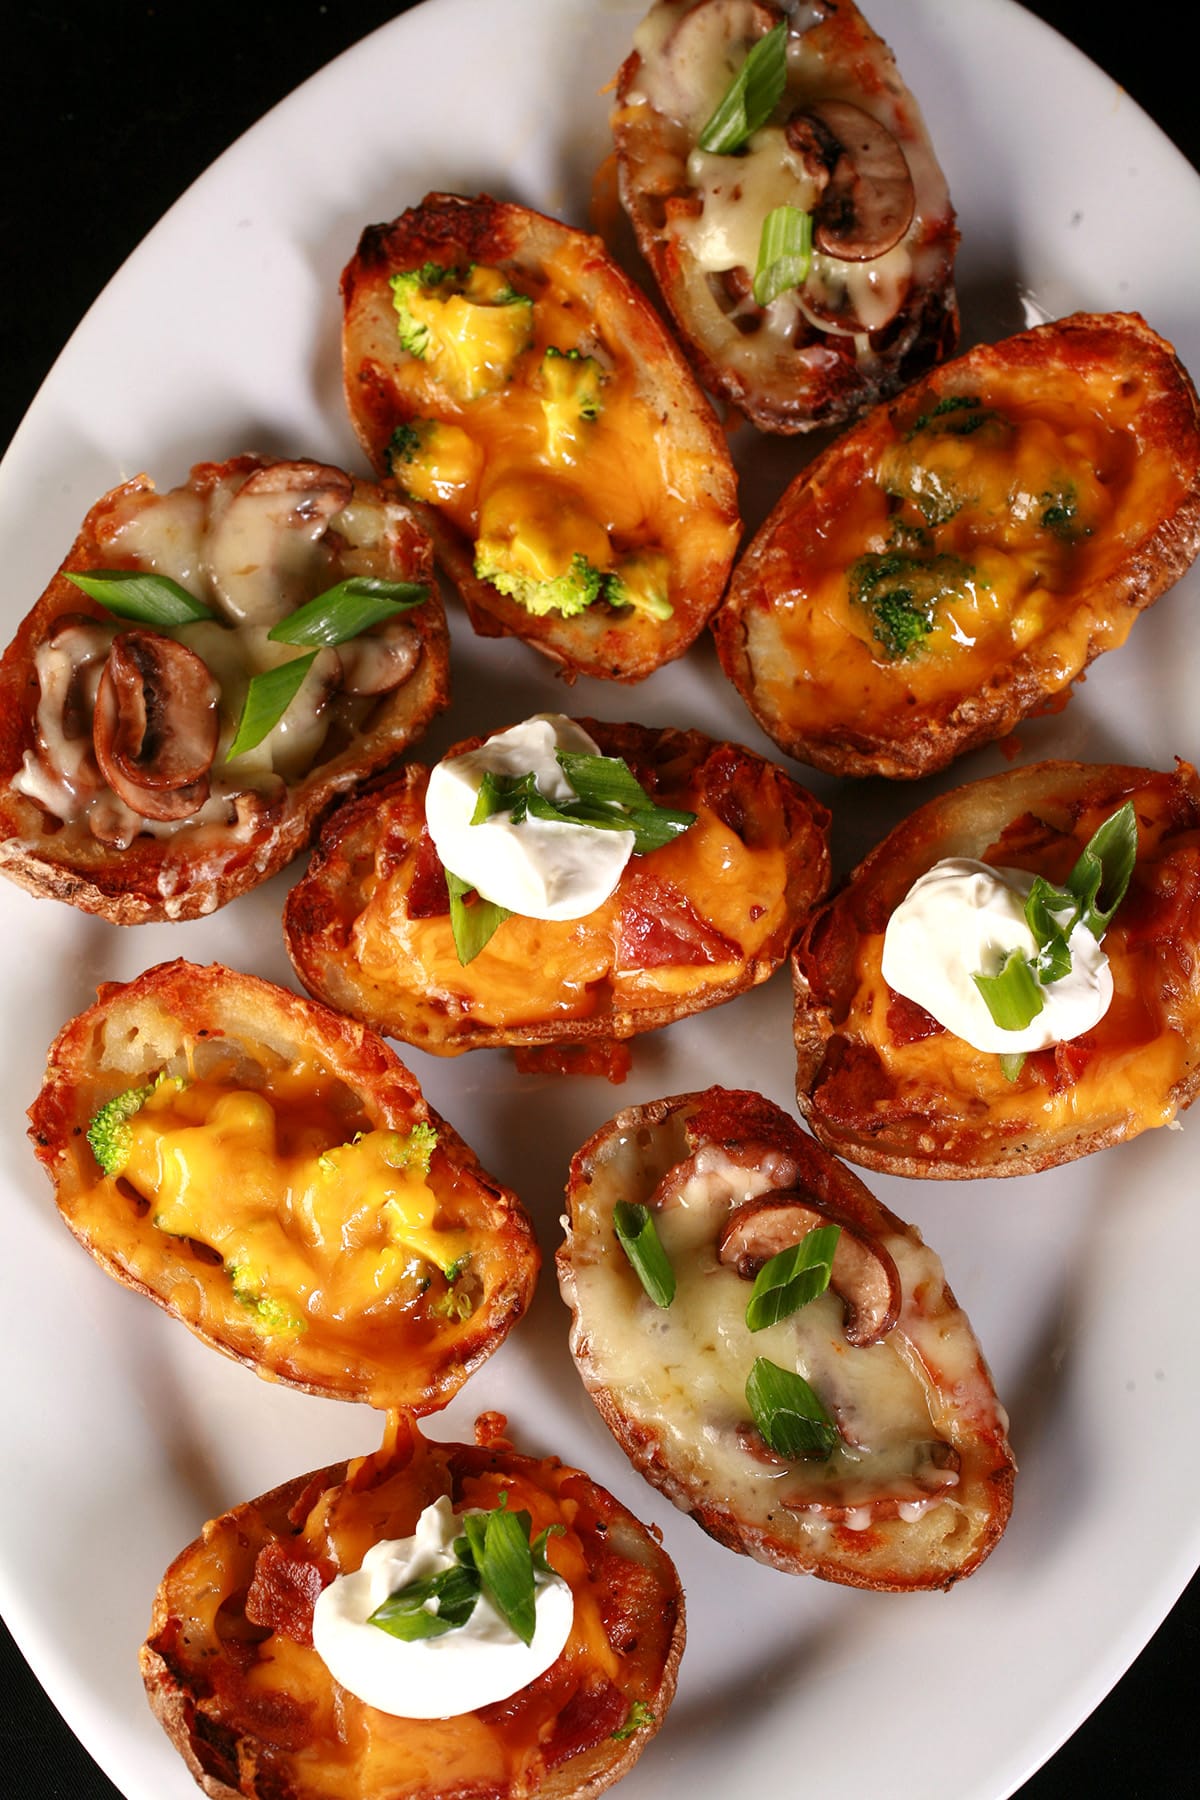 A plate of loaded potato skins, with various toppings.